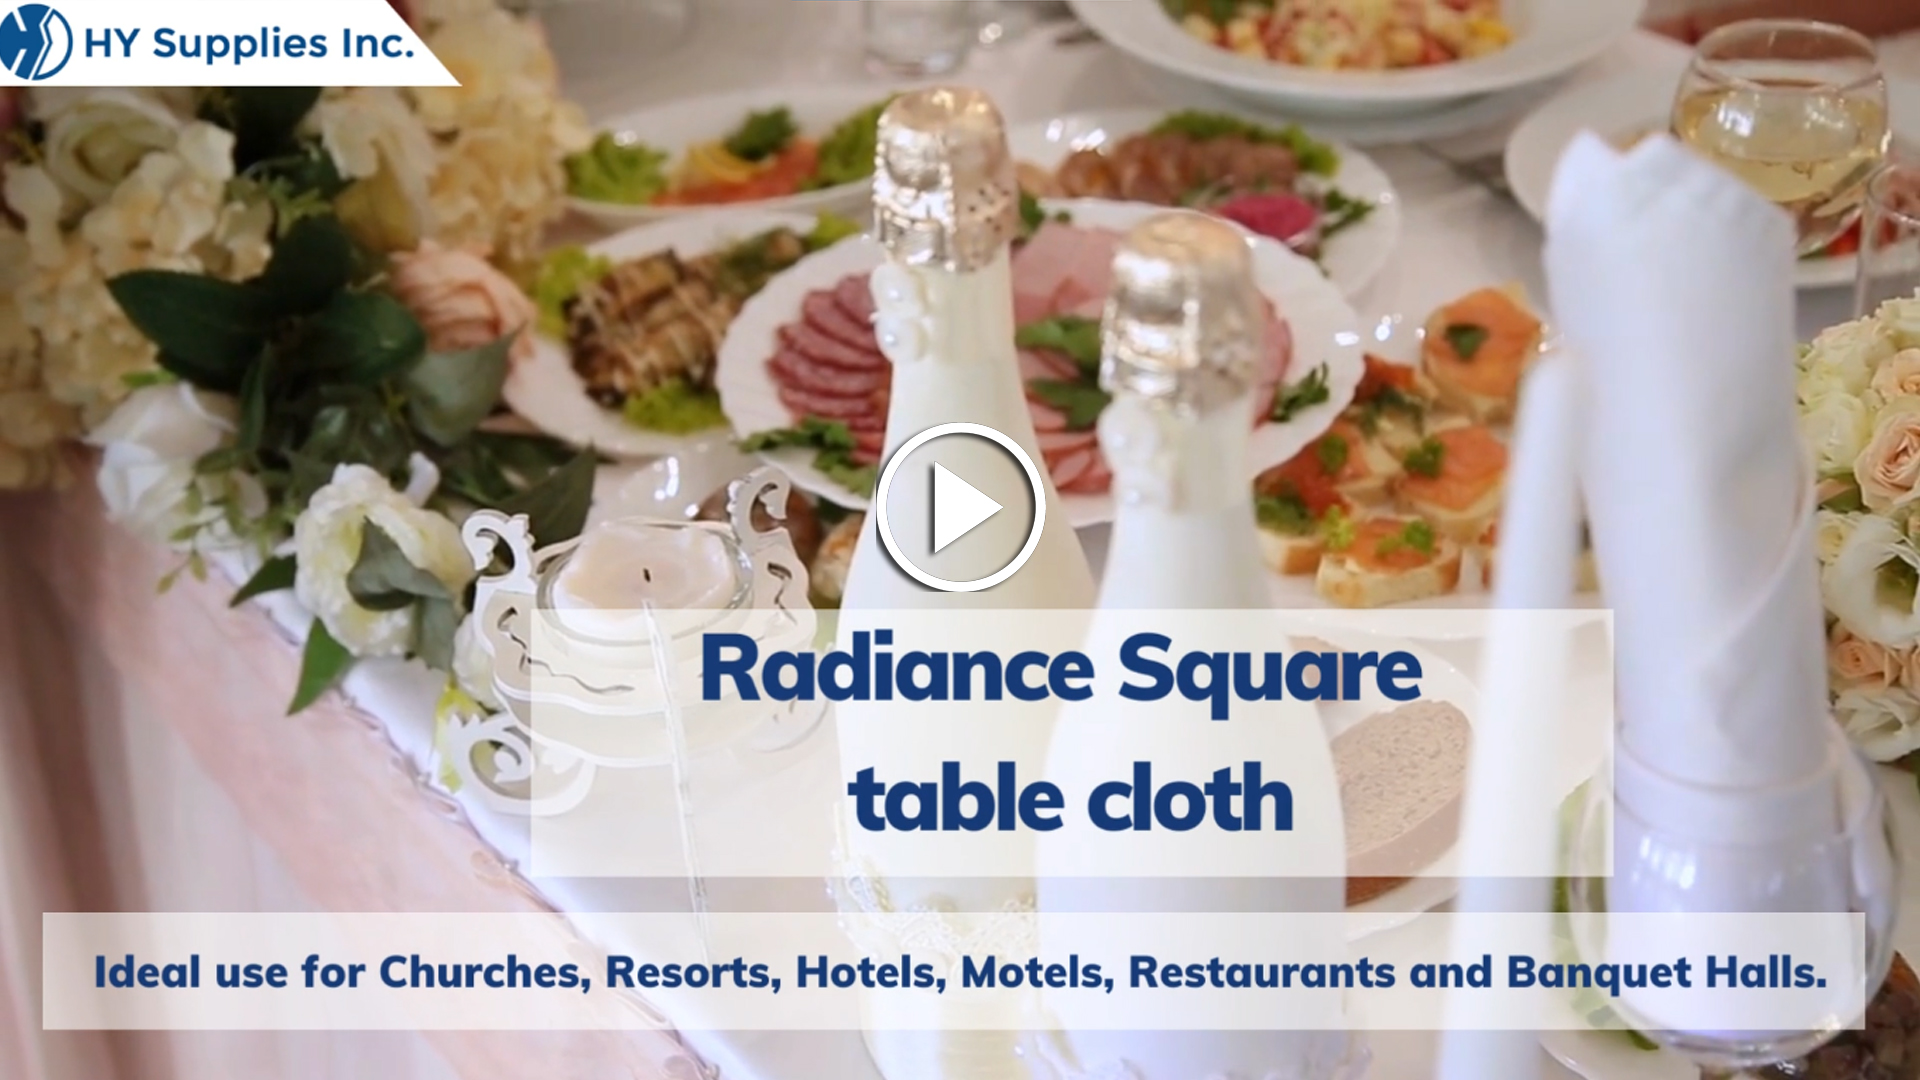 Radiance Square table cloth